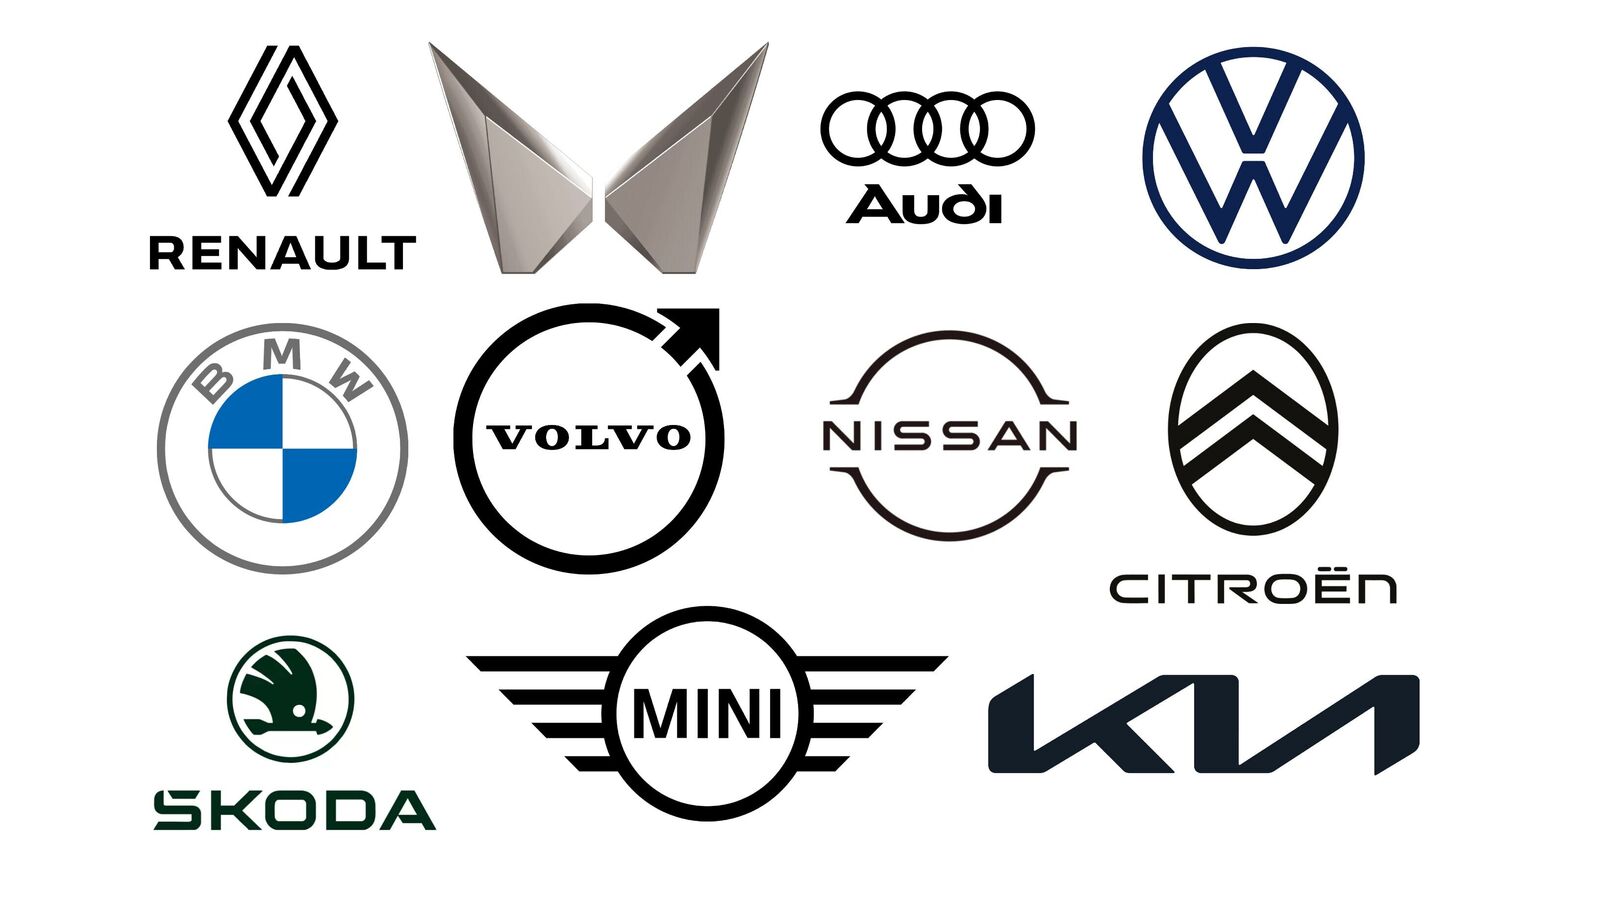 Carmakers shifting to minimal & simple logos, marking a shift in